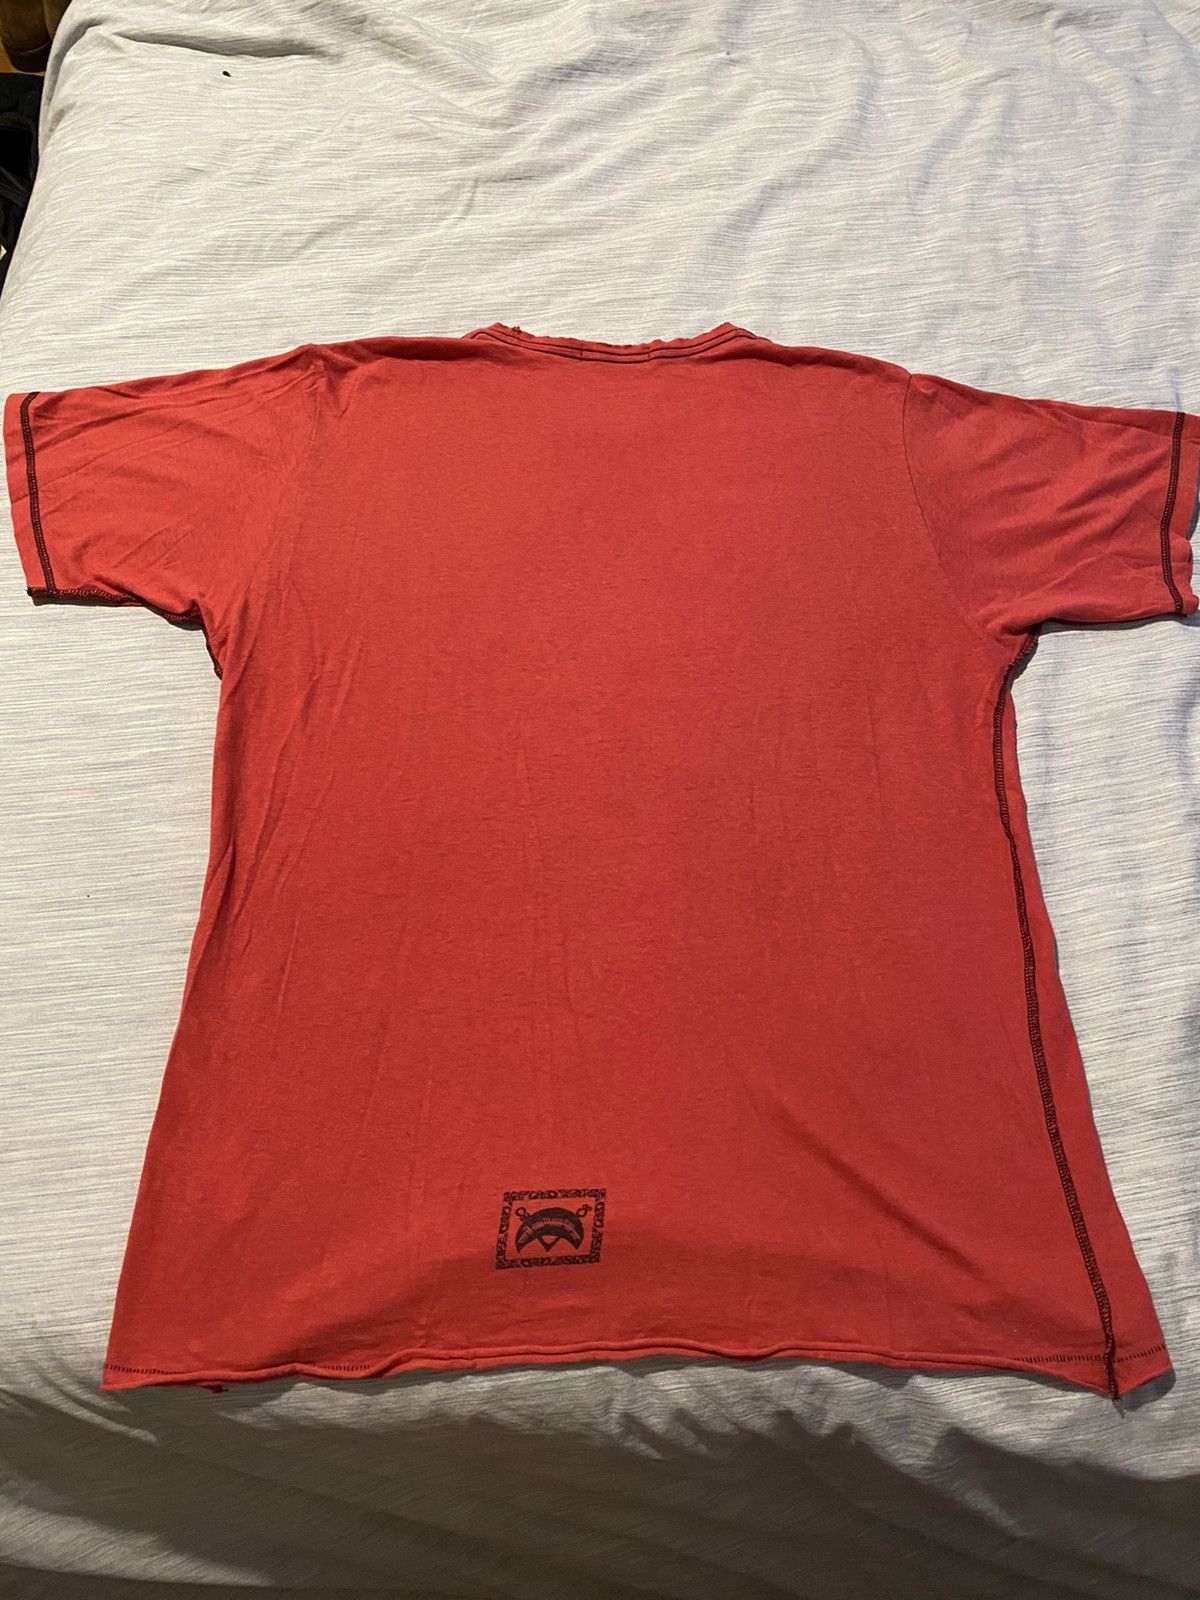 Undercover Undercover Scab Bear Red T-shirt Size US L / EU 52-54 / 3 - 8 Thumbnail